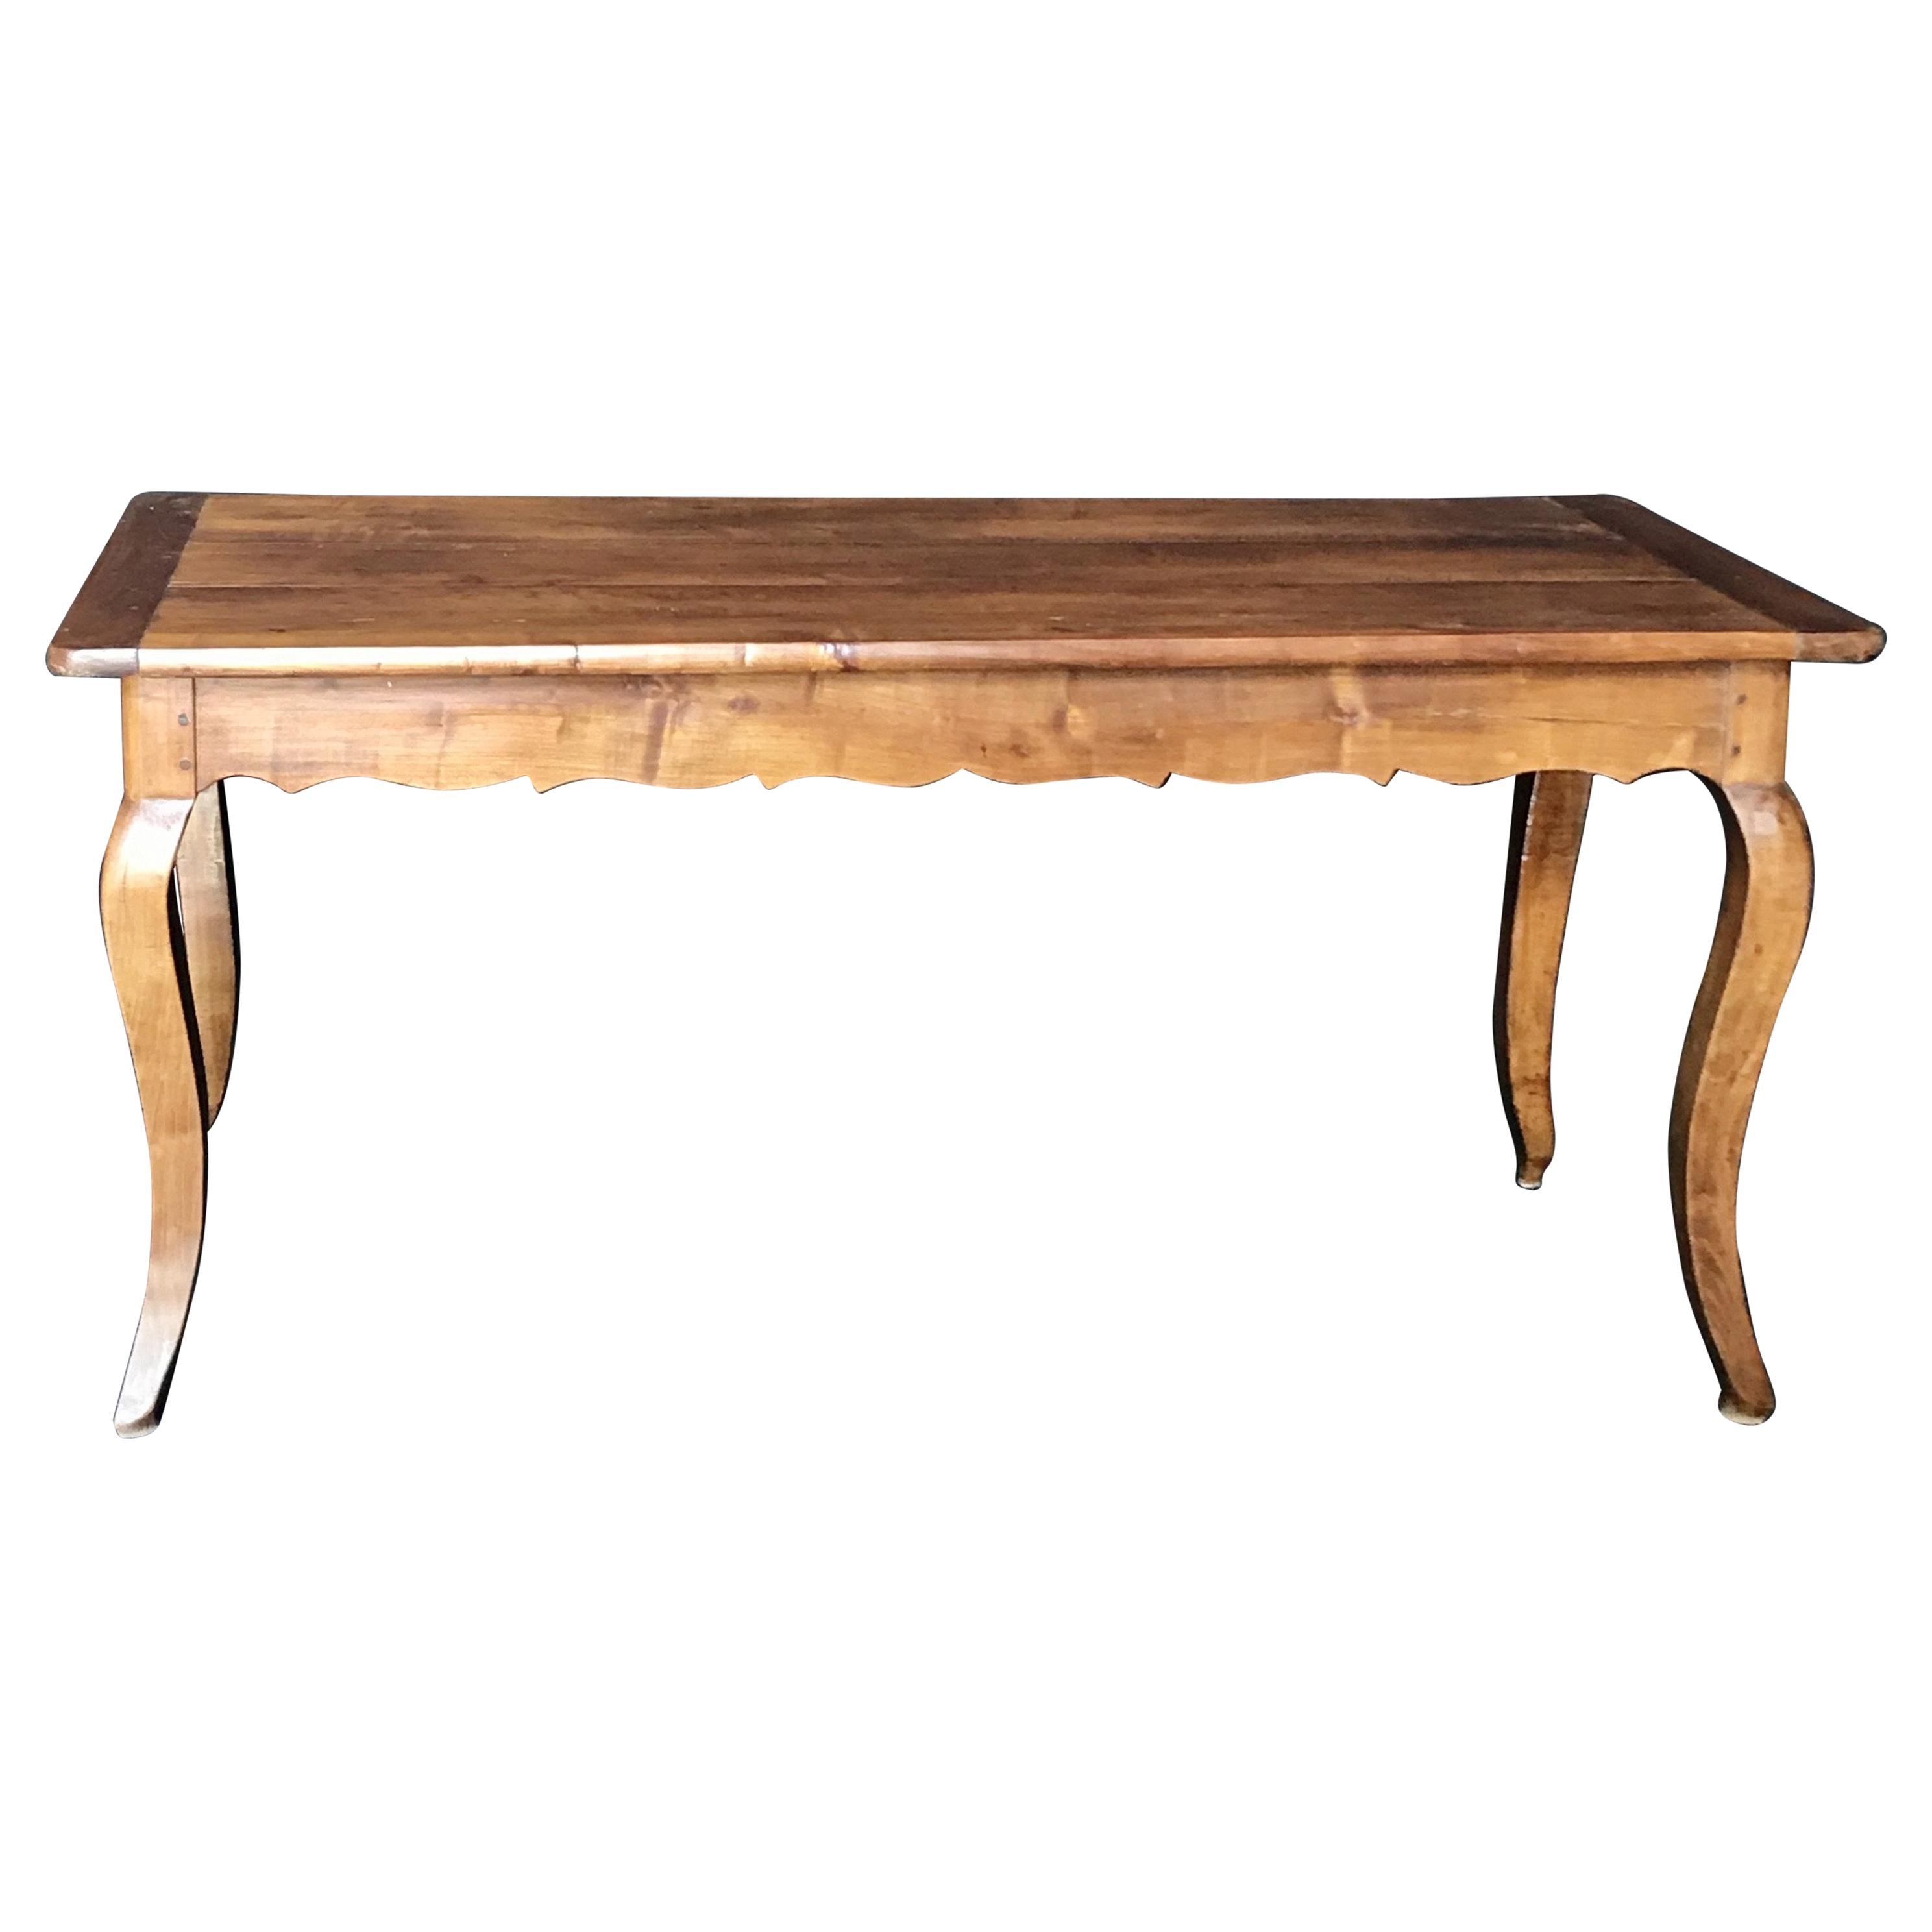 French Walnut Dining Table or Roomy Desk with Scalloped Apron